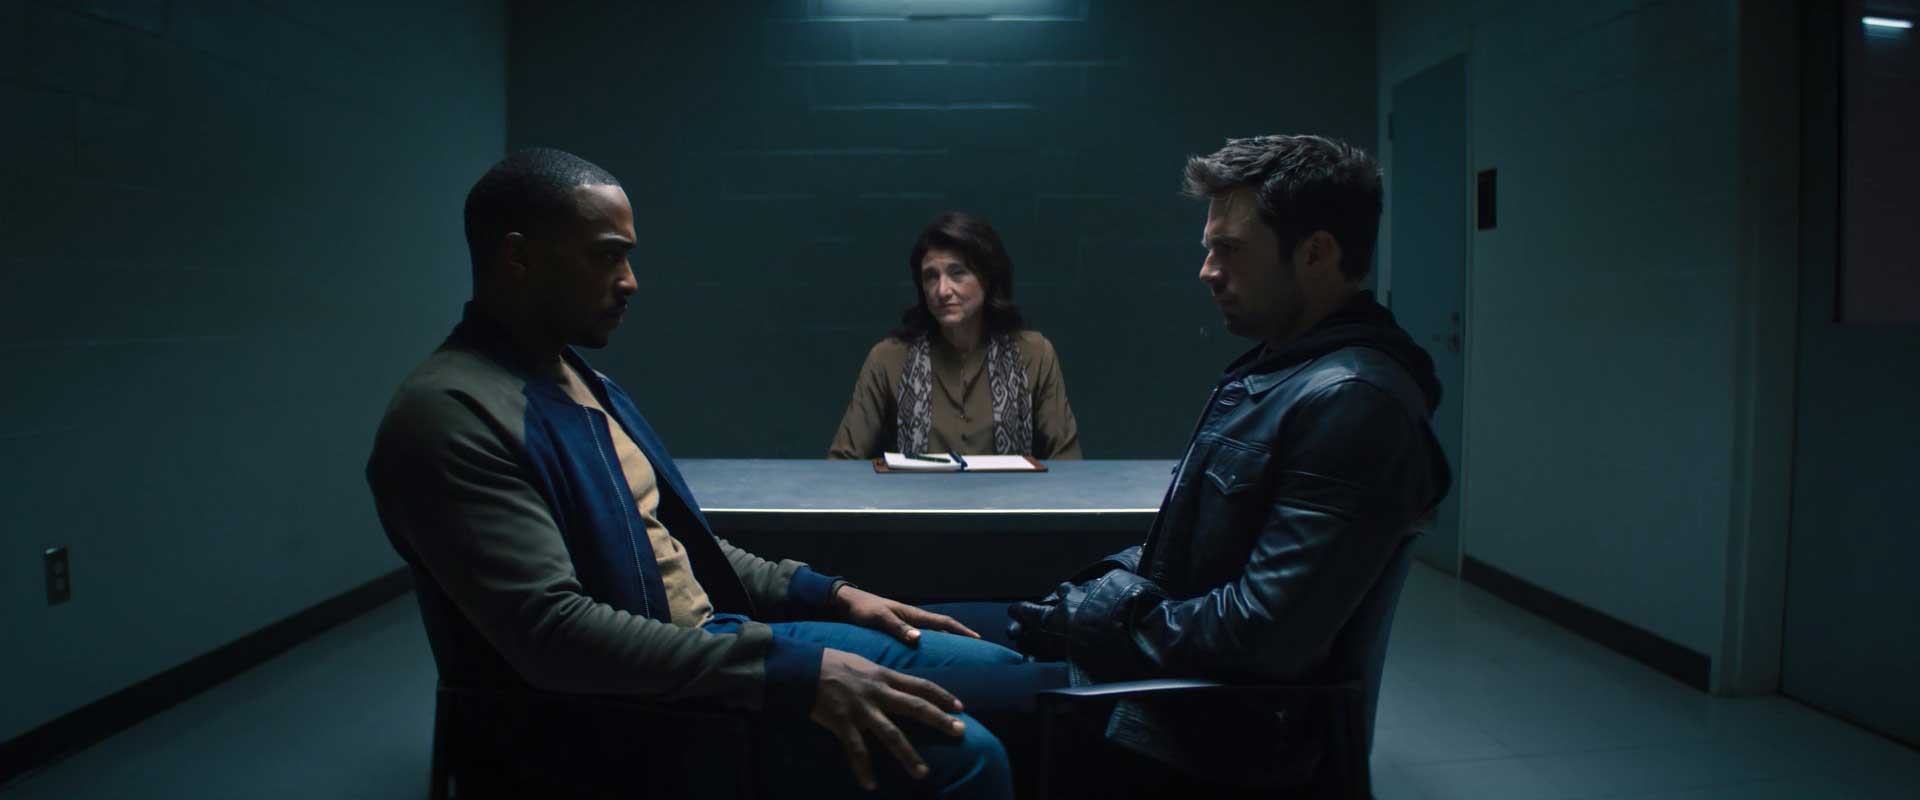 The Falcon and the Winter Soldier Episode 2 Still 1